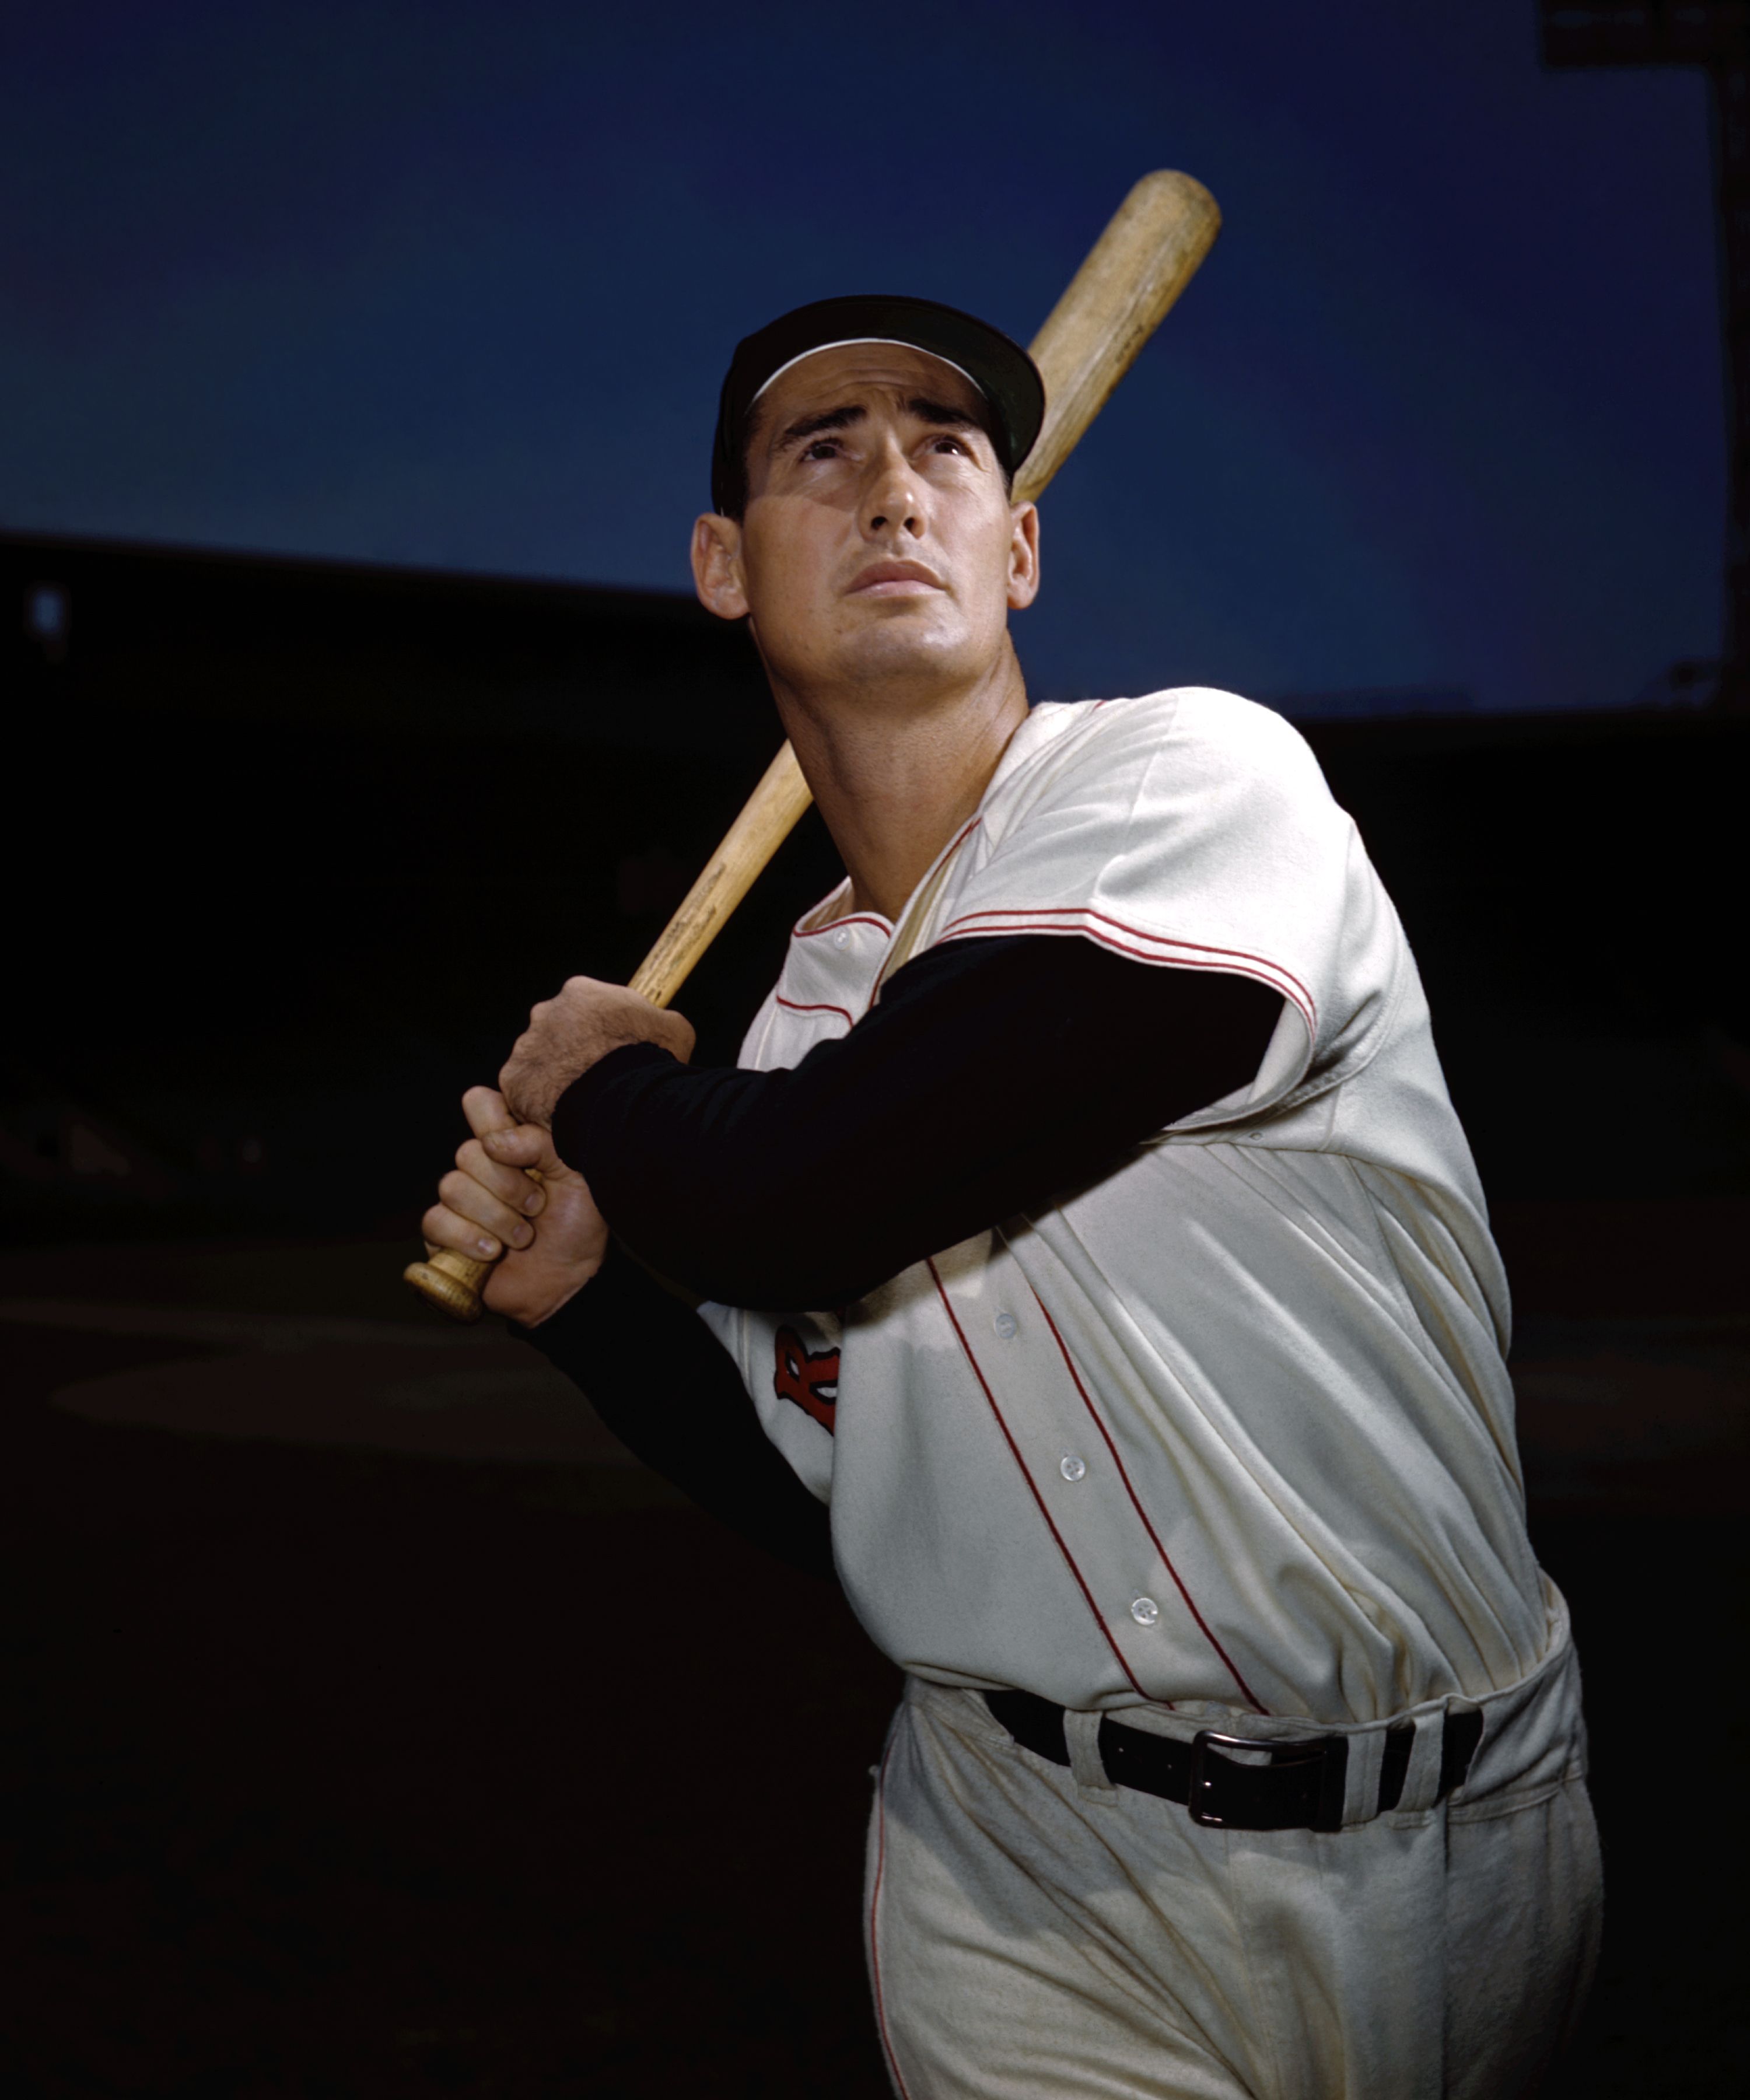 Biography of Ted Williams by Richard Ben Cramer